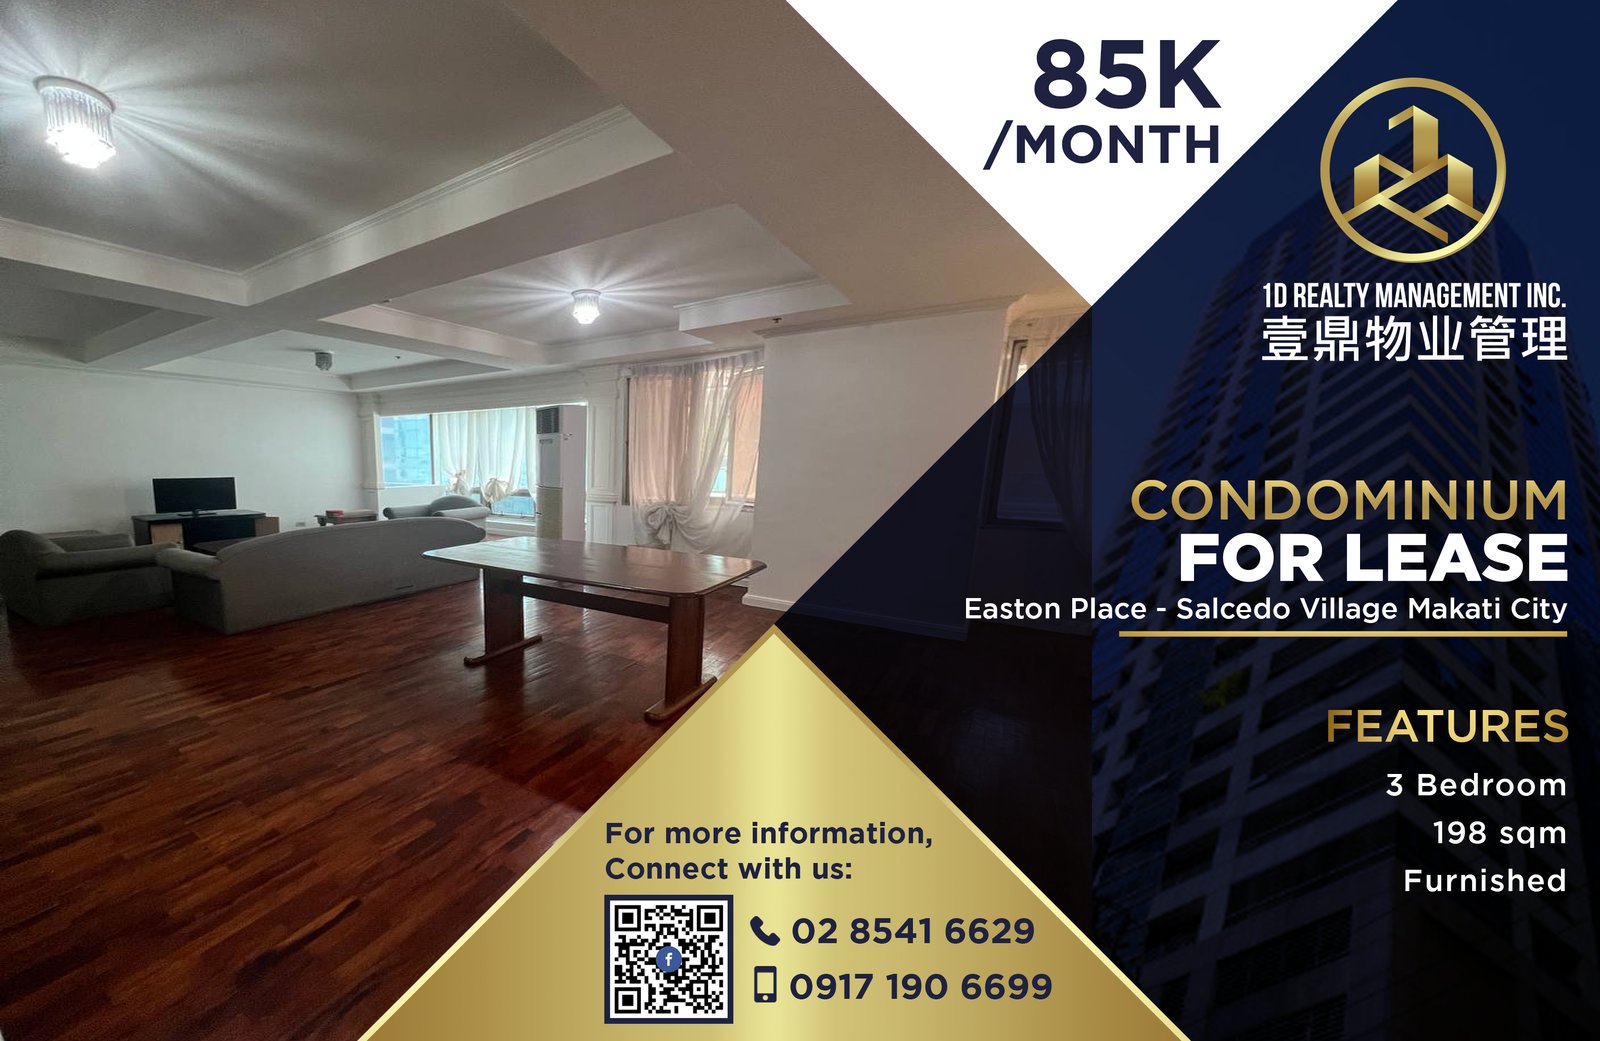 EASTON PLACE Salcedo Village Makati City - FOR LEASE